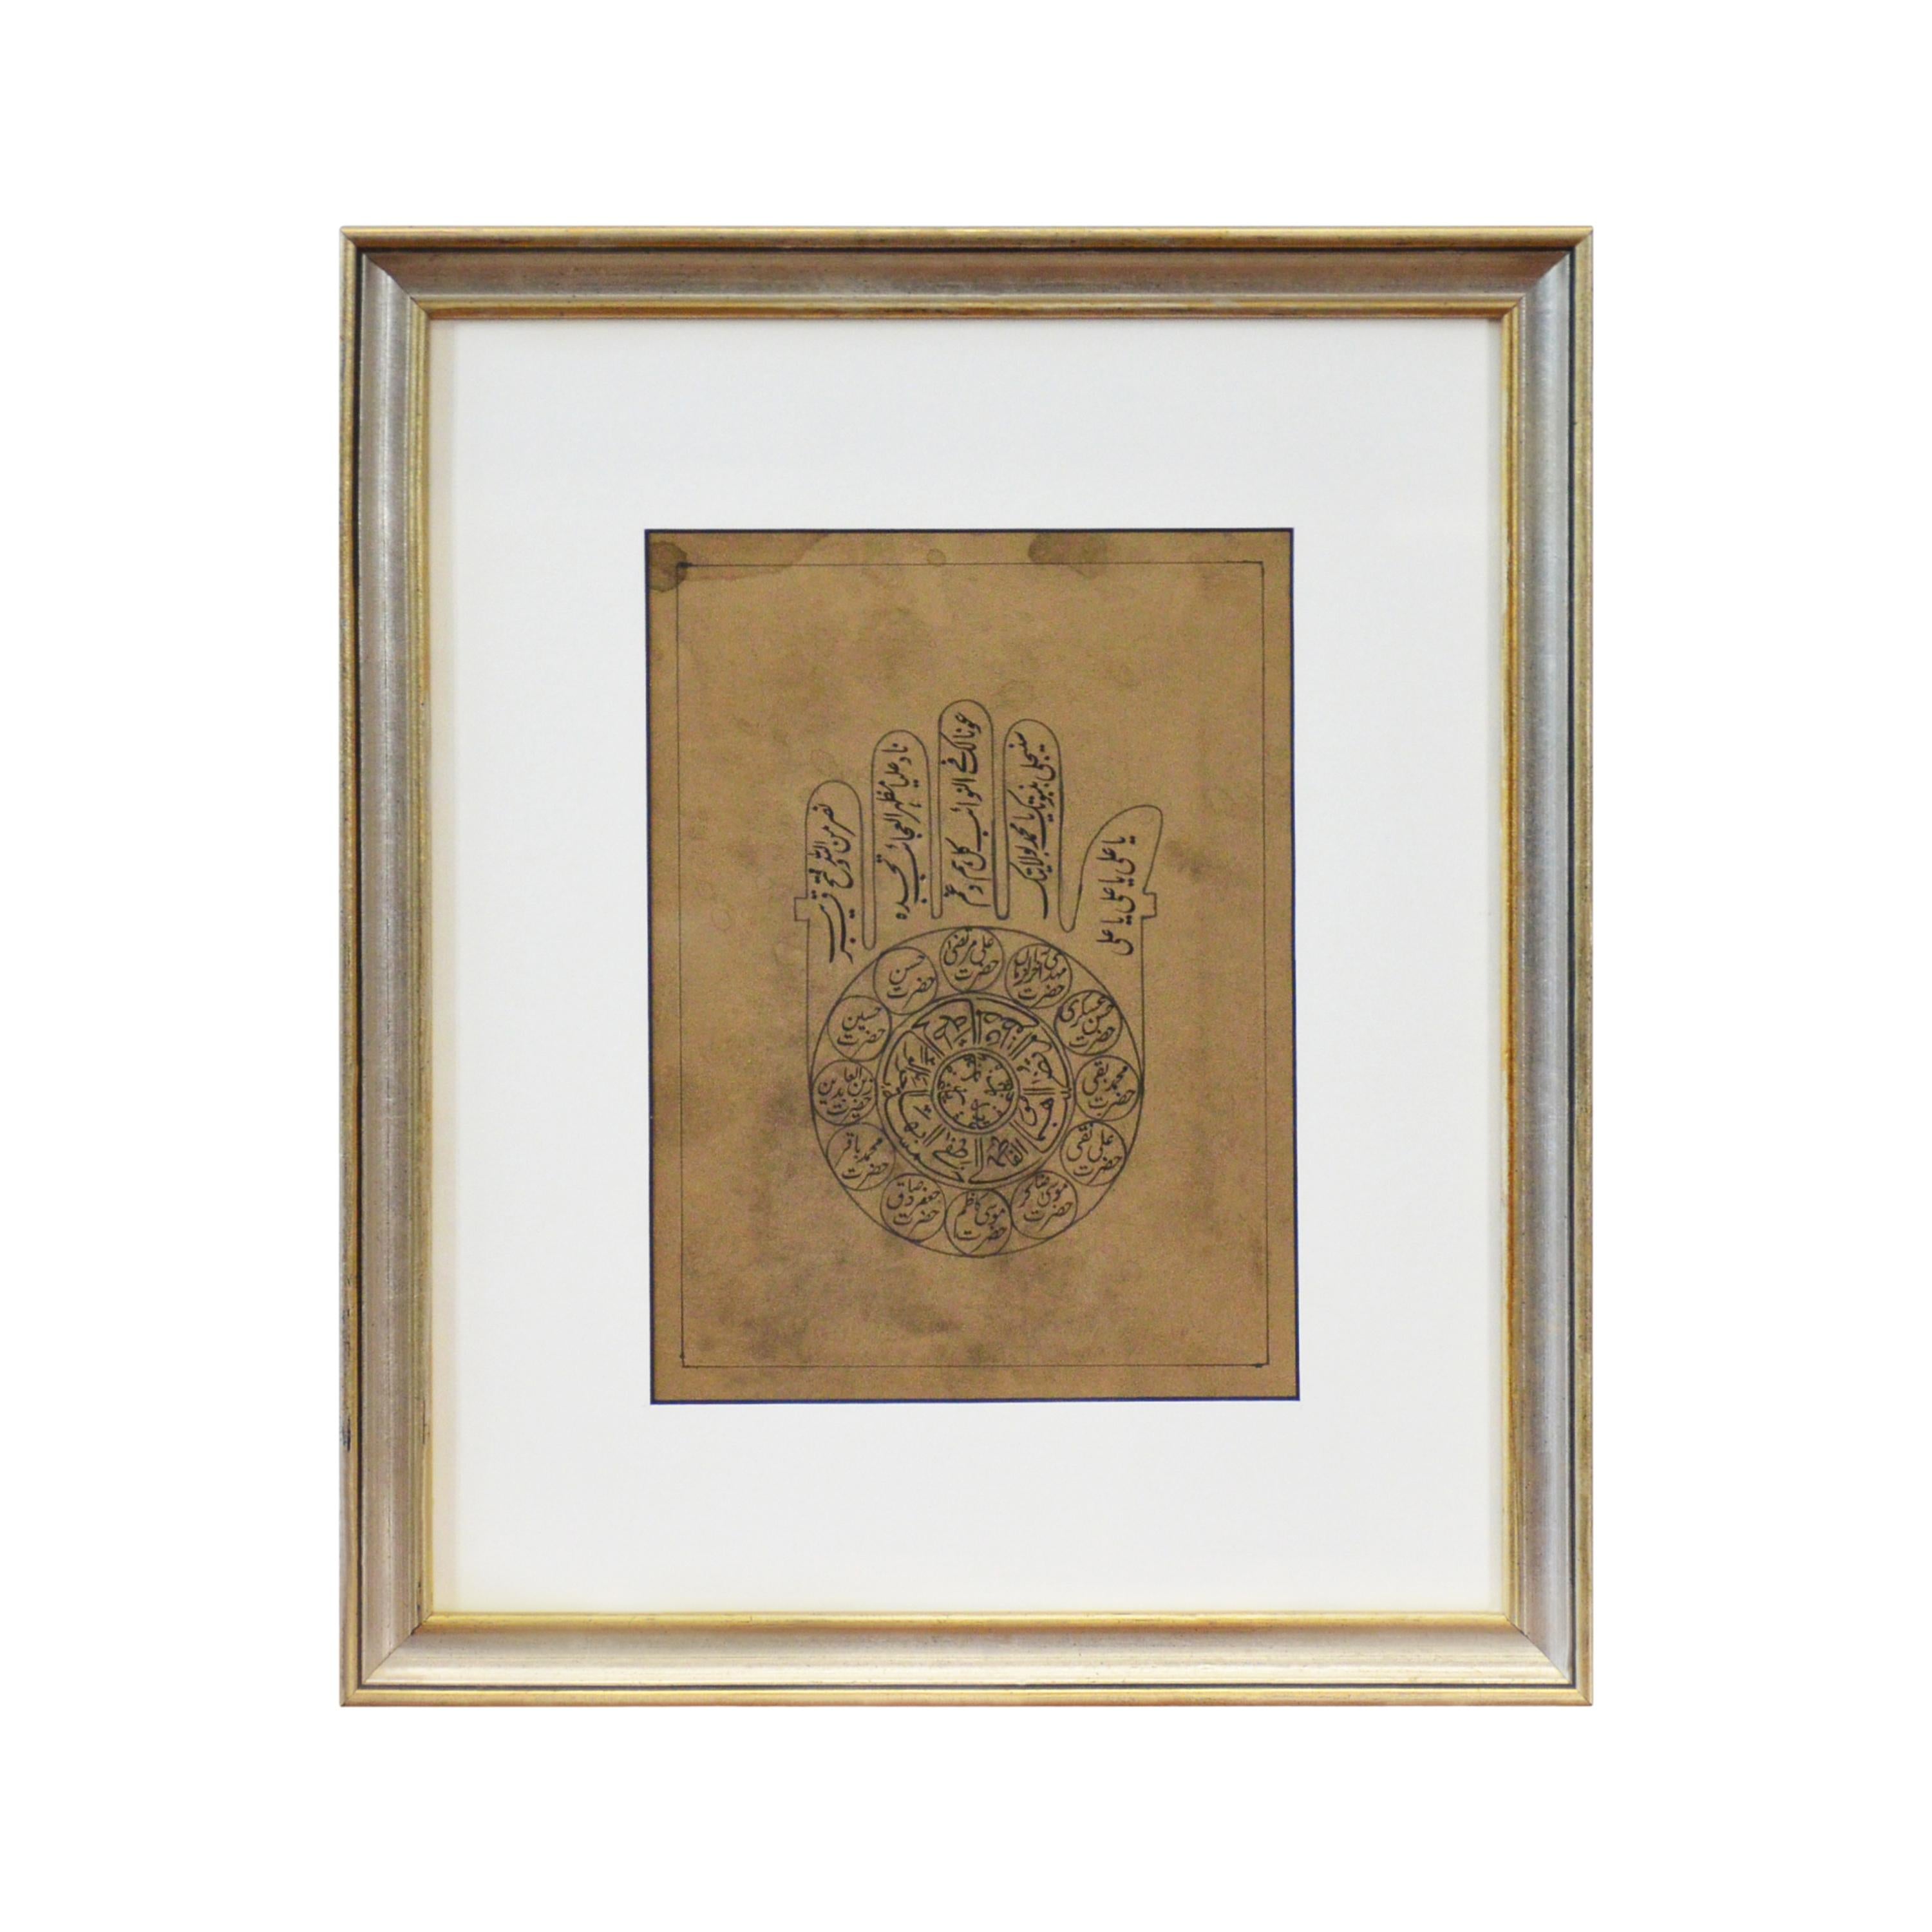 Astrological Hand-Painted on Parchment Print Depicting a Hand with Calligraphy For Sale 3